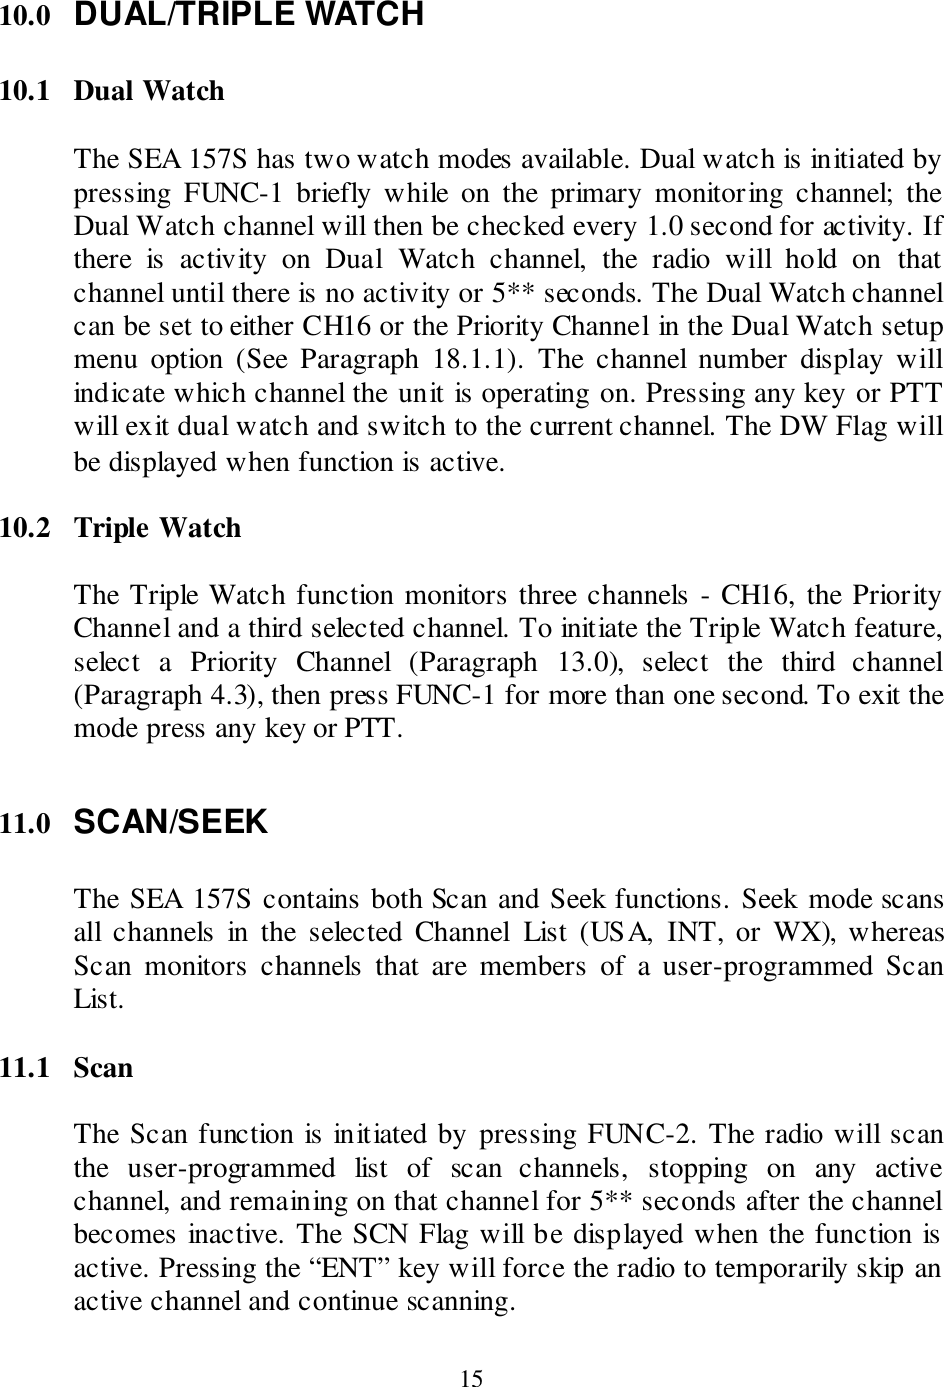  15 10.0 DUAL/TRIPLE WATCH  10.1  Dual Watch  The SEA 157S has two watch modes available. Dual watch is initiated by pressing  FUNC-1  briefly  while  on  the  primary  monitoring  channel;  the Dual Watch channel will then be checked every 1.0 second for activity. If there  is  activity  on  Dual  Watch  channel,  the  radio  will  hold  on  that channel until there is no activity or 5** seconds. The Dual Watch channel can be set to either CH16 or the Priority Channel in the Dual Watch setup menu  option  (See  Paragraph  18.1.1).  The  channel  number  display  will indicate which channel the unit is operating on. Pressing any key or PTT will exit dual watch and switch to the current channel. The DW Flag will be displayed when function is active.  10.2  Triple Watch  The Triple Watch function monitors three channels - CH16, the Priority Channel and a third selected channel. To initiate the Triple Watch feature, select  a  Priority  Channel  (Paragraph  13.0),  select  the  third  channel (Paragraph 4.3), then press FUNC-1 for more than one second. To exit the mode press any key or PTT.  11.0 SCAN/SEEK  The SEA 157S contains both Scan and Seek functions. Seek mode scans all  channels  in  the  selected  Channel  List  (USA,  INT,  or  WX), whereas Scan  monitors  channels  that  are  members  of  a  user-programmed  Scan List.  11.1  Scan  The Scan function is initiated by pressing FUNC-2. The radio will scan the  user-programmed  list  of  scan  channels,  stopping  on  any  active channel, and remaining on that channel for 5** seconds after the channel becomes inactive. The SCN Flag will be displayed when the function is active. Pressing the “ENT” key will force the radio to temporarily skip an active channel and continue scanning.  